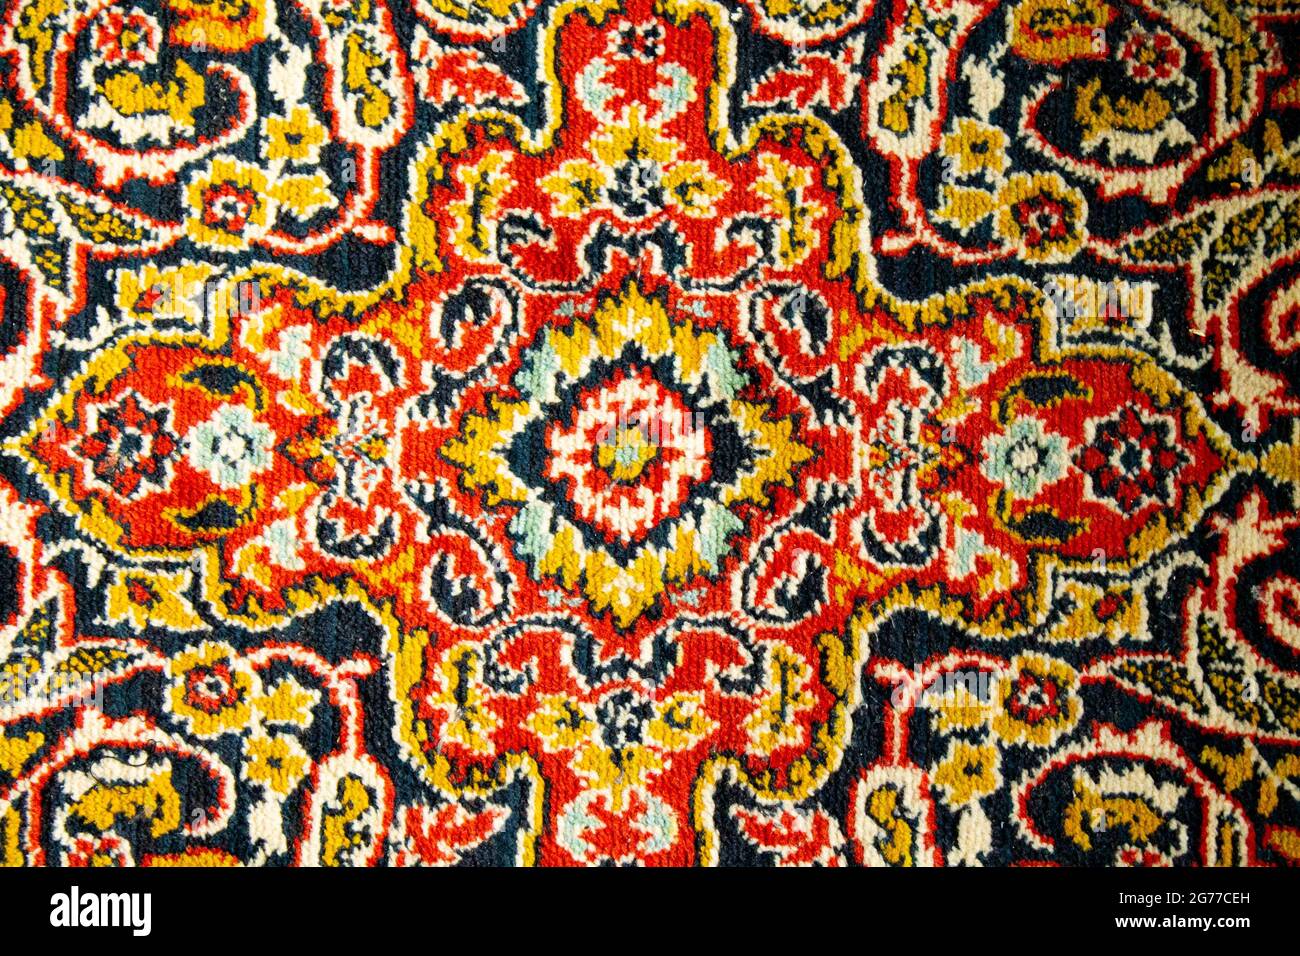 Wall carpet. Red carpet with an abstract pattern. Stock Photo